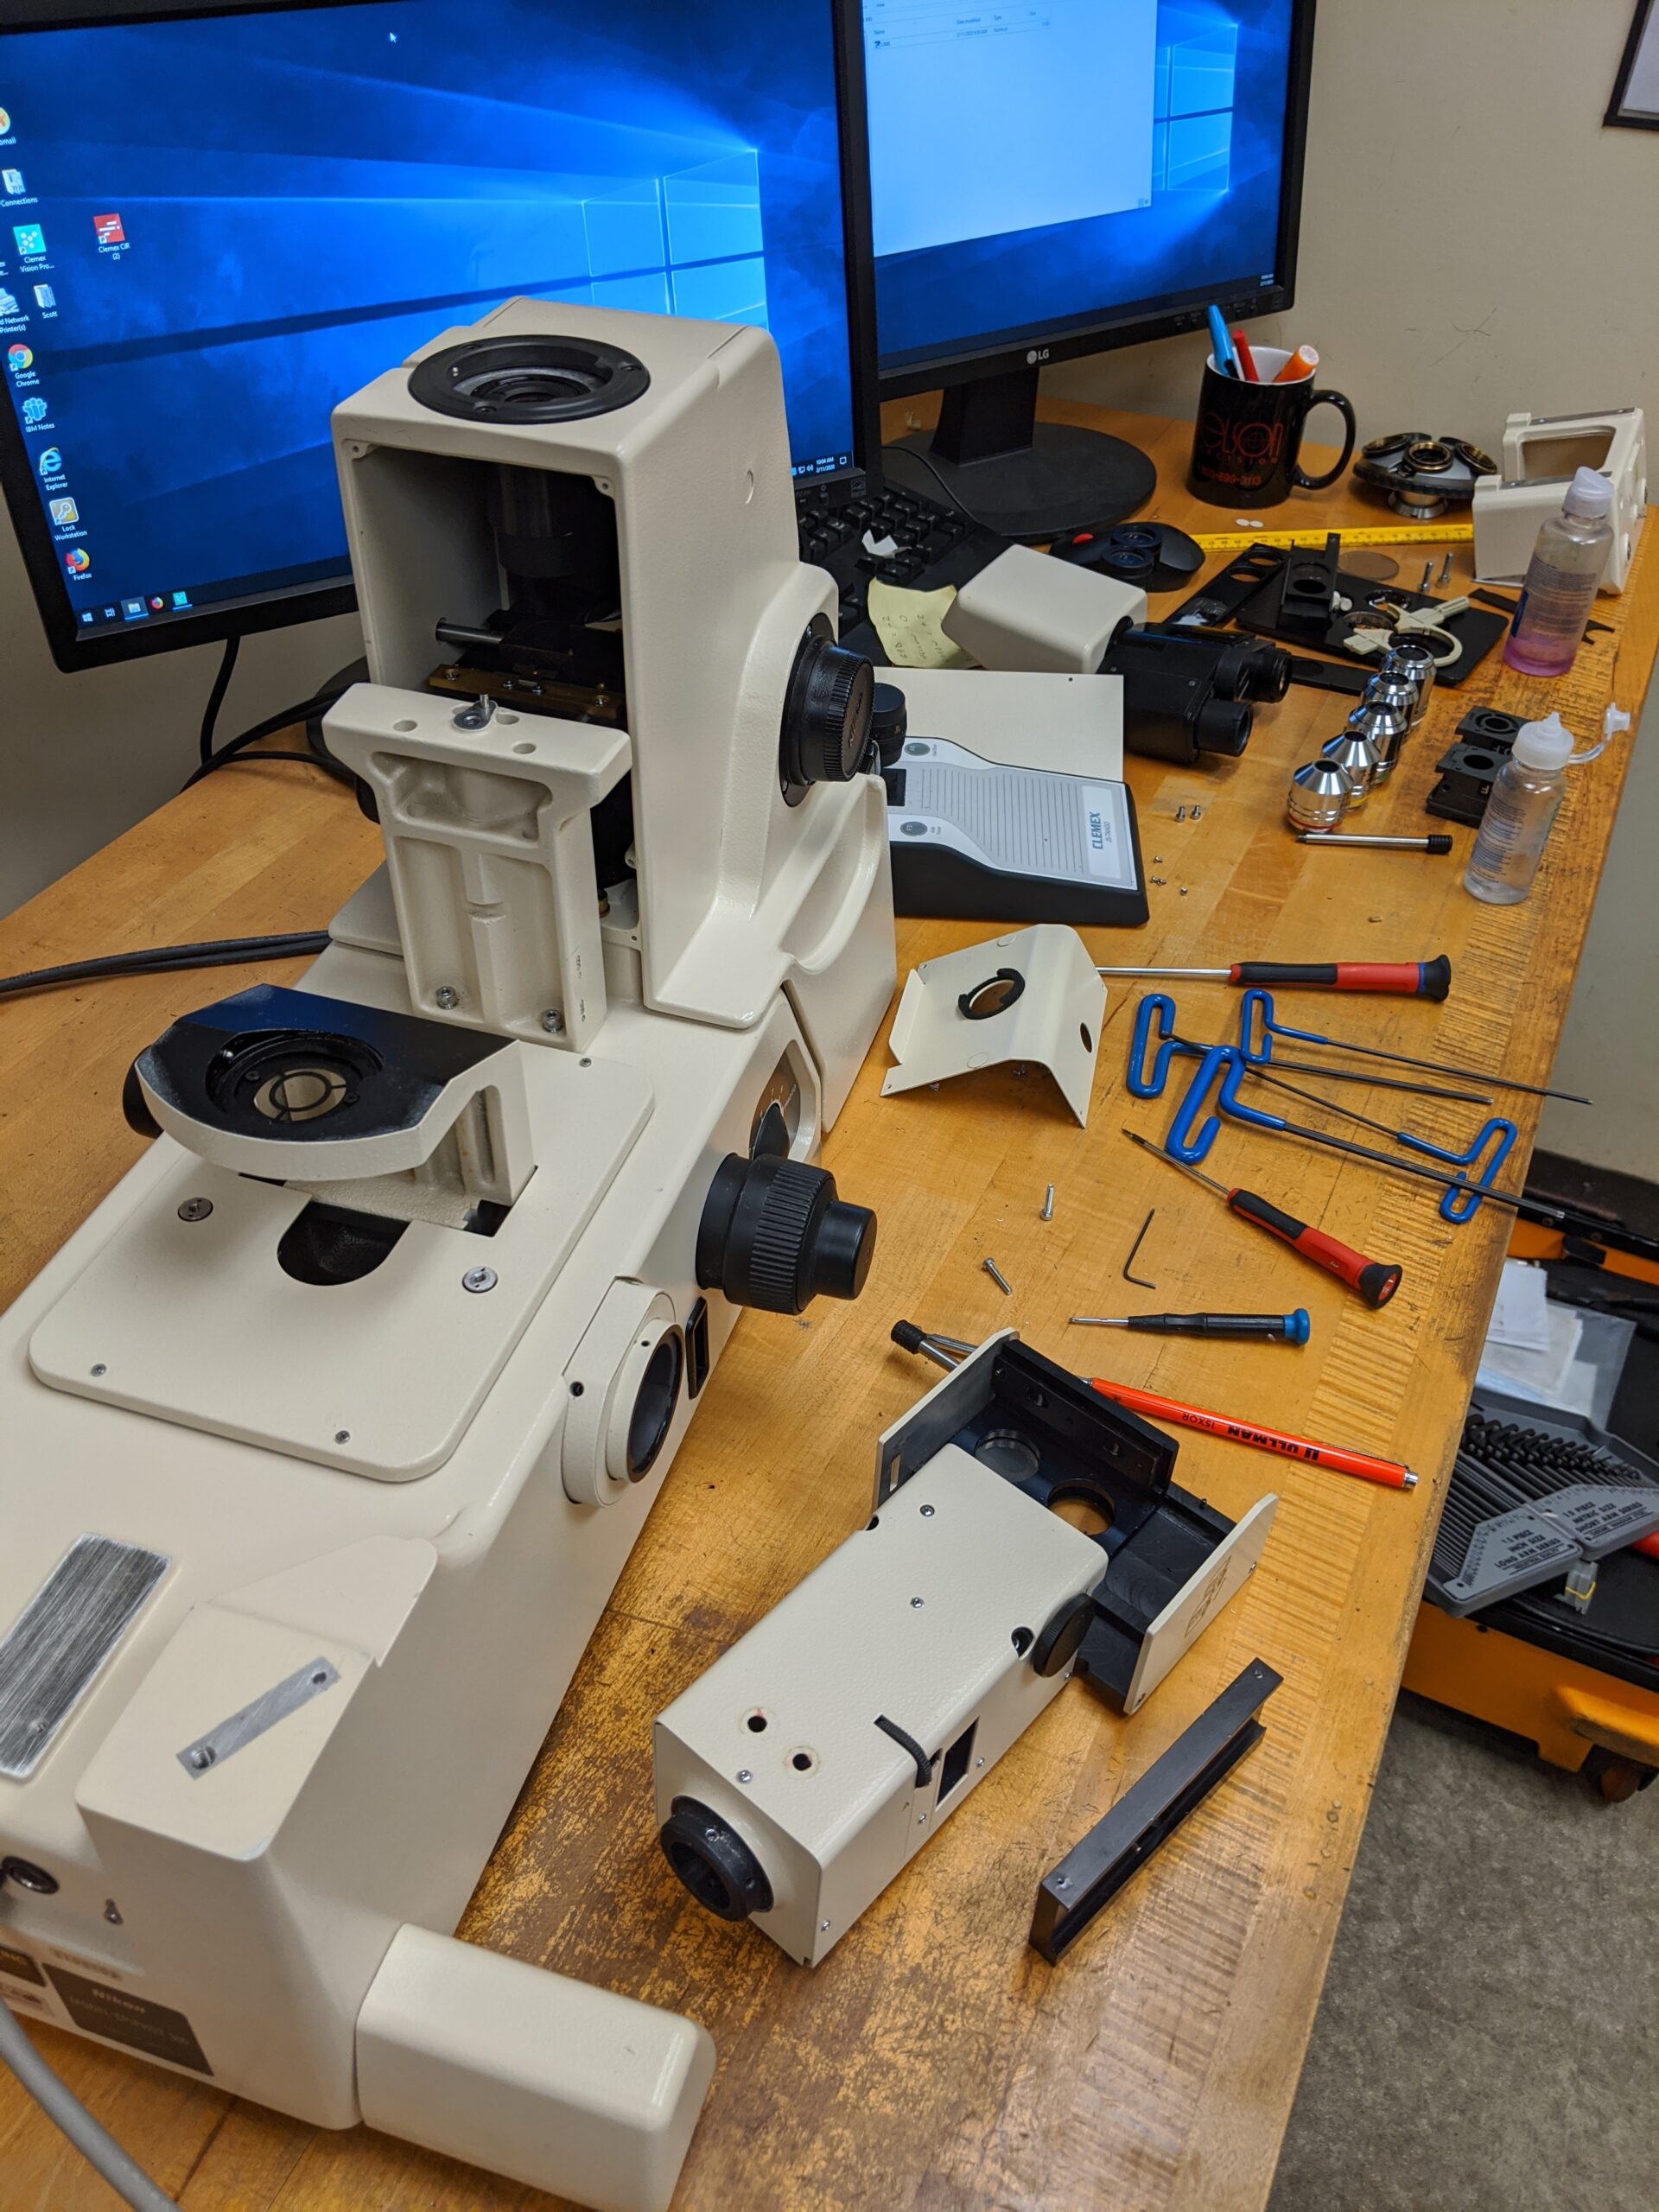 Nikon Epiphot 300 Metallograph Microscope Profiler Comparator Linear Stage Cleaning and Calibration Accredited to 17025 Michigan, Ohio, Indiana, New York